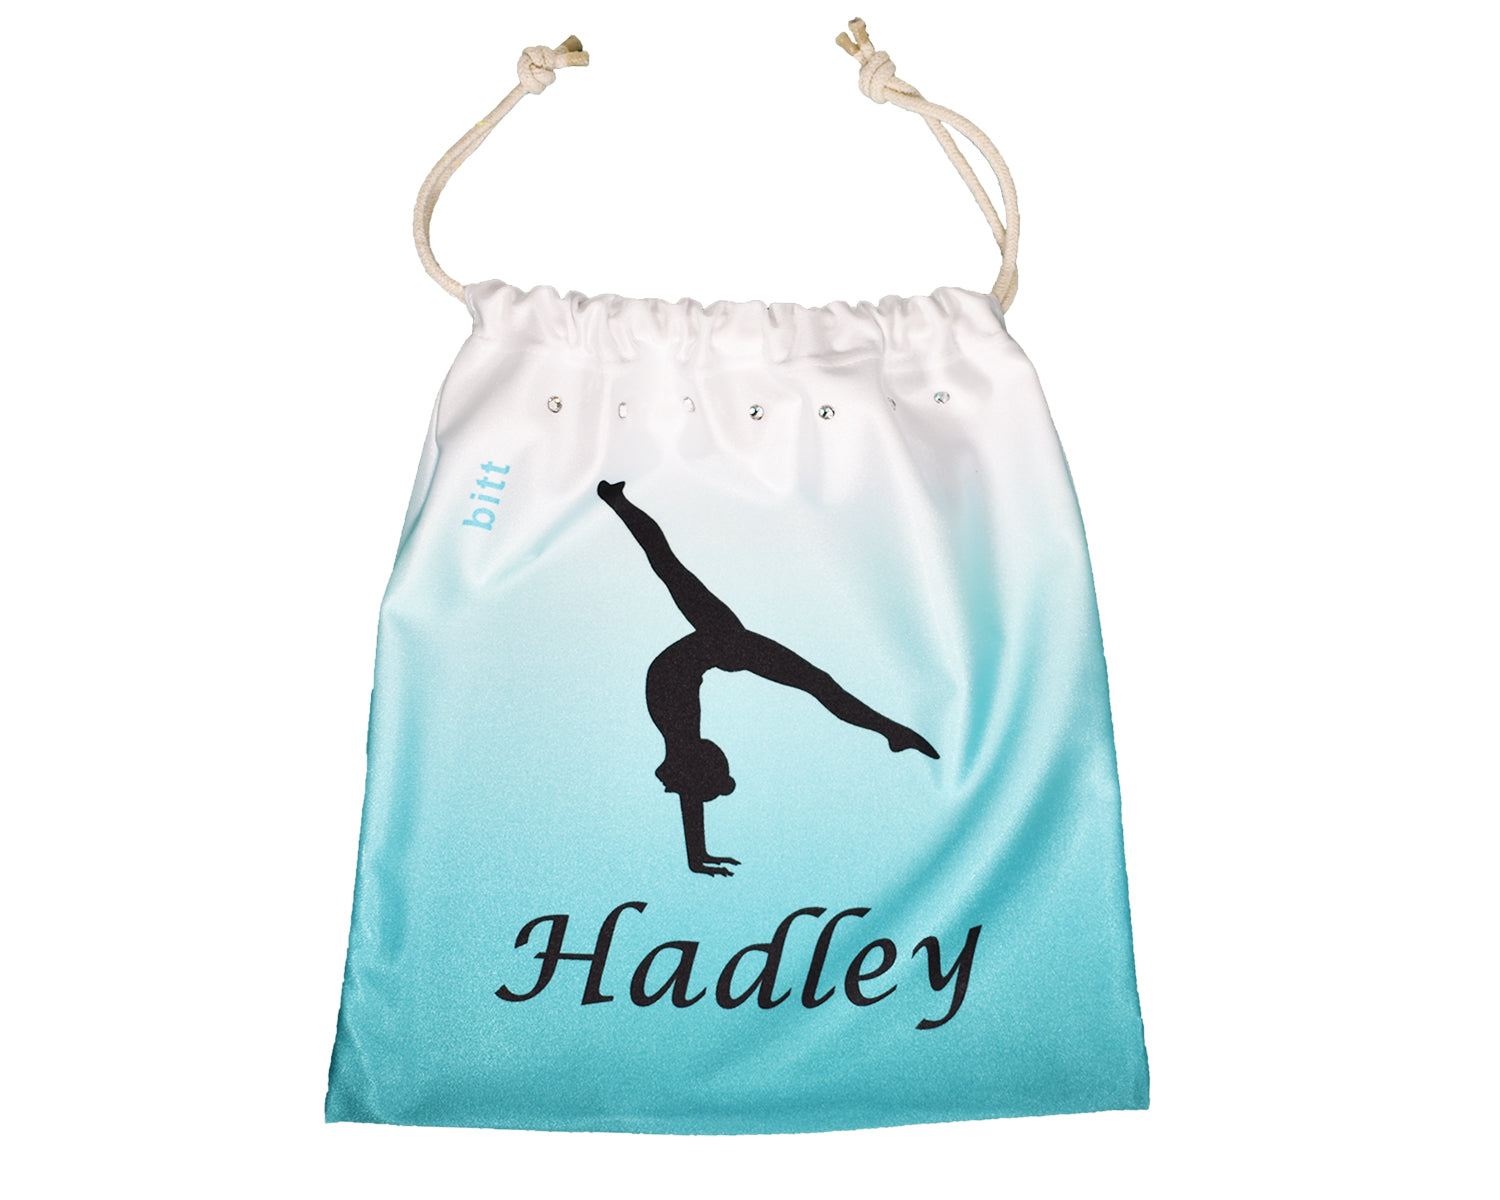 Personalized Grip Bag Teal Ombre with Gymnastics Handstand